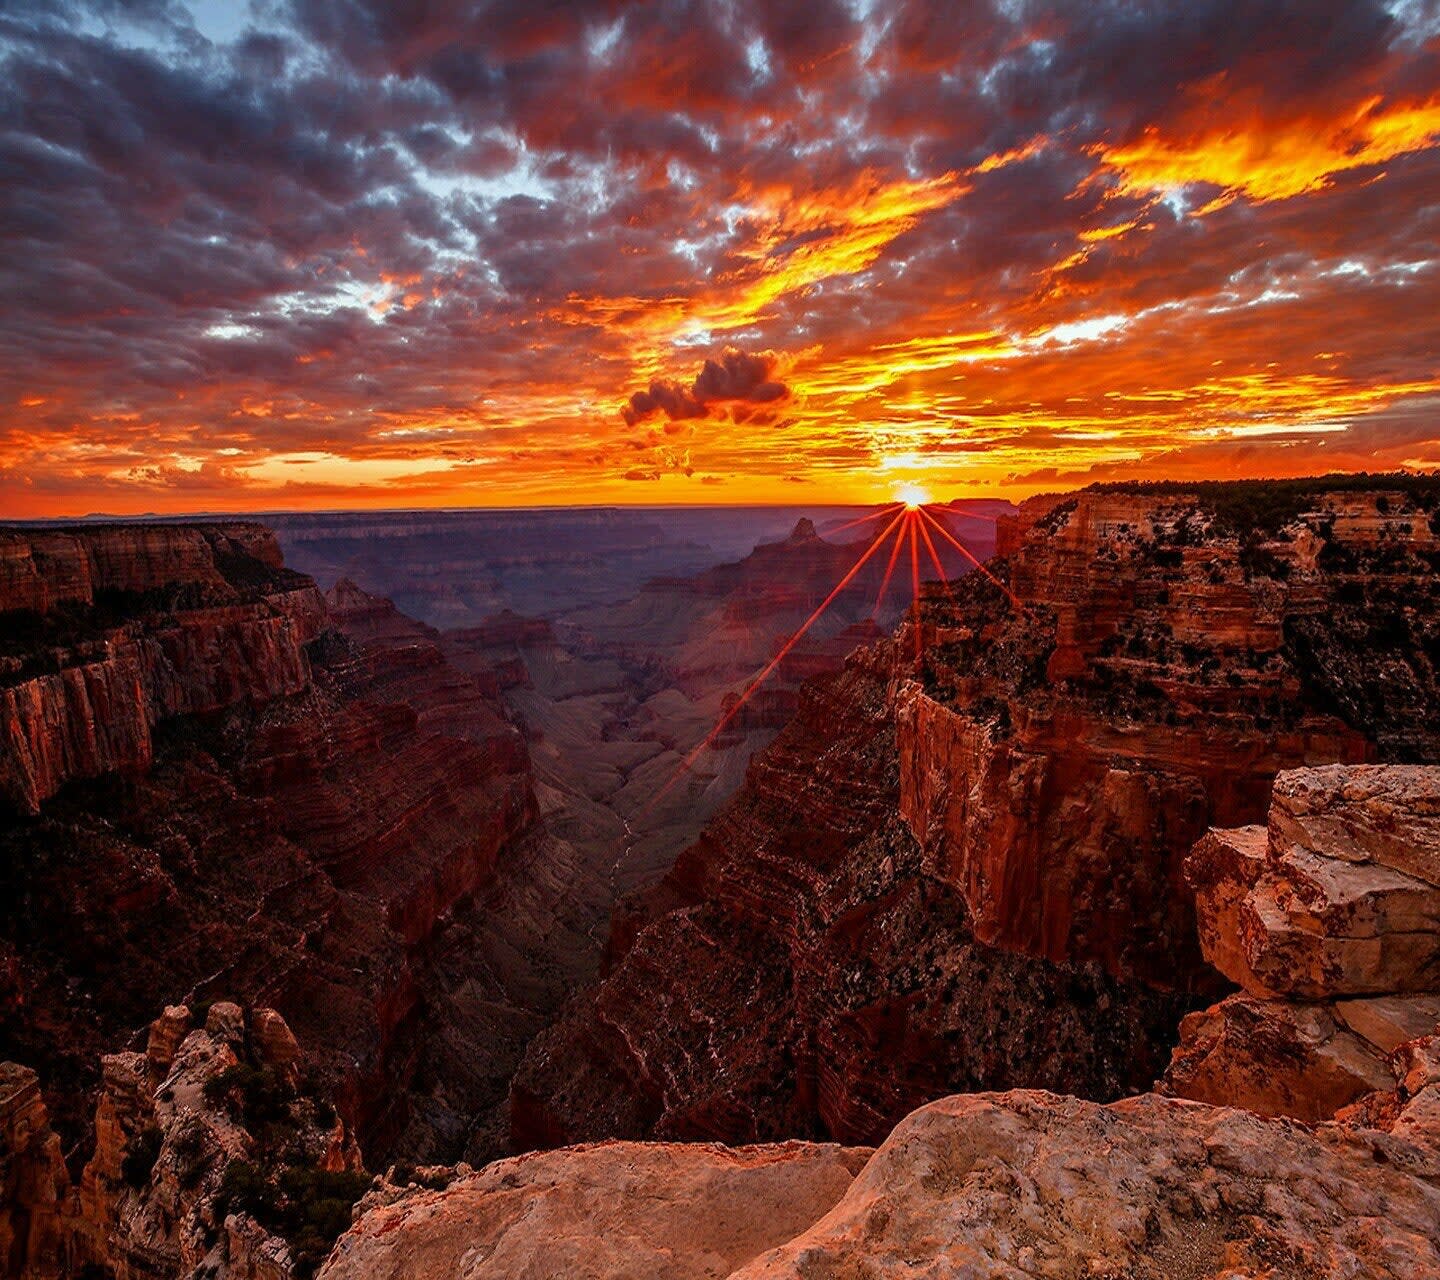 The Grand Canyon, at sunset. [originally posted by Sheila Wise (@wise_sheila) on twitter]